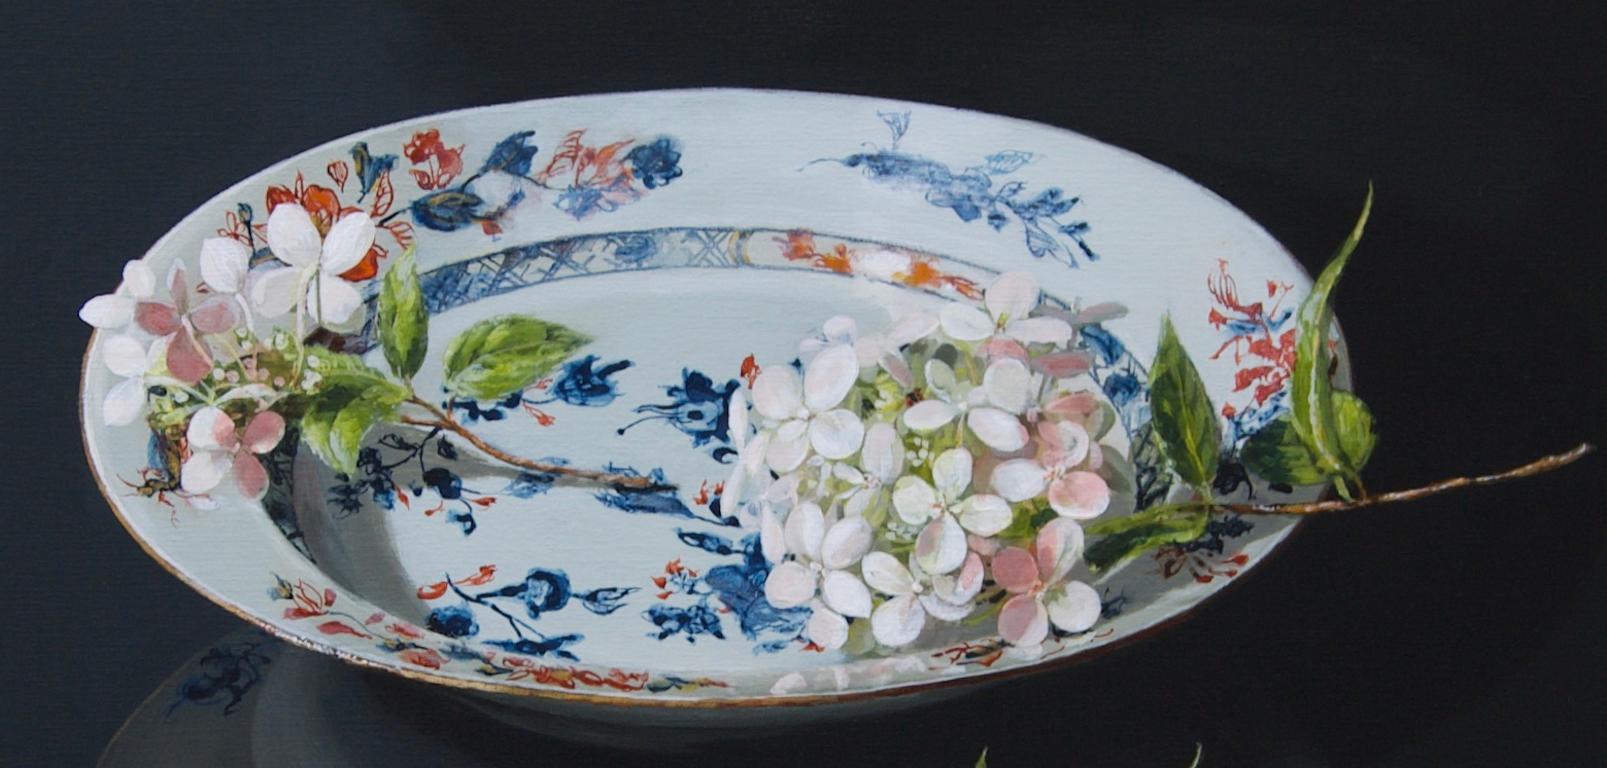 ''Last Hydrangea'', Contemporary Still Life with Porcelain and Flowers  - Painting by Sasja Wagenaar